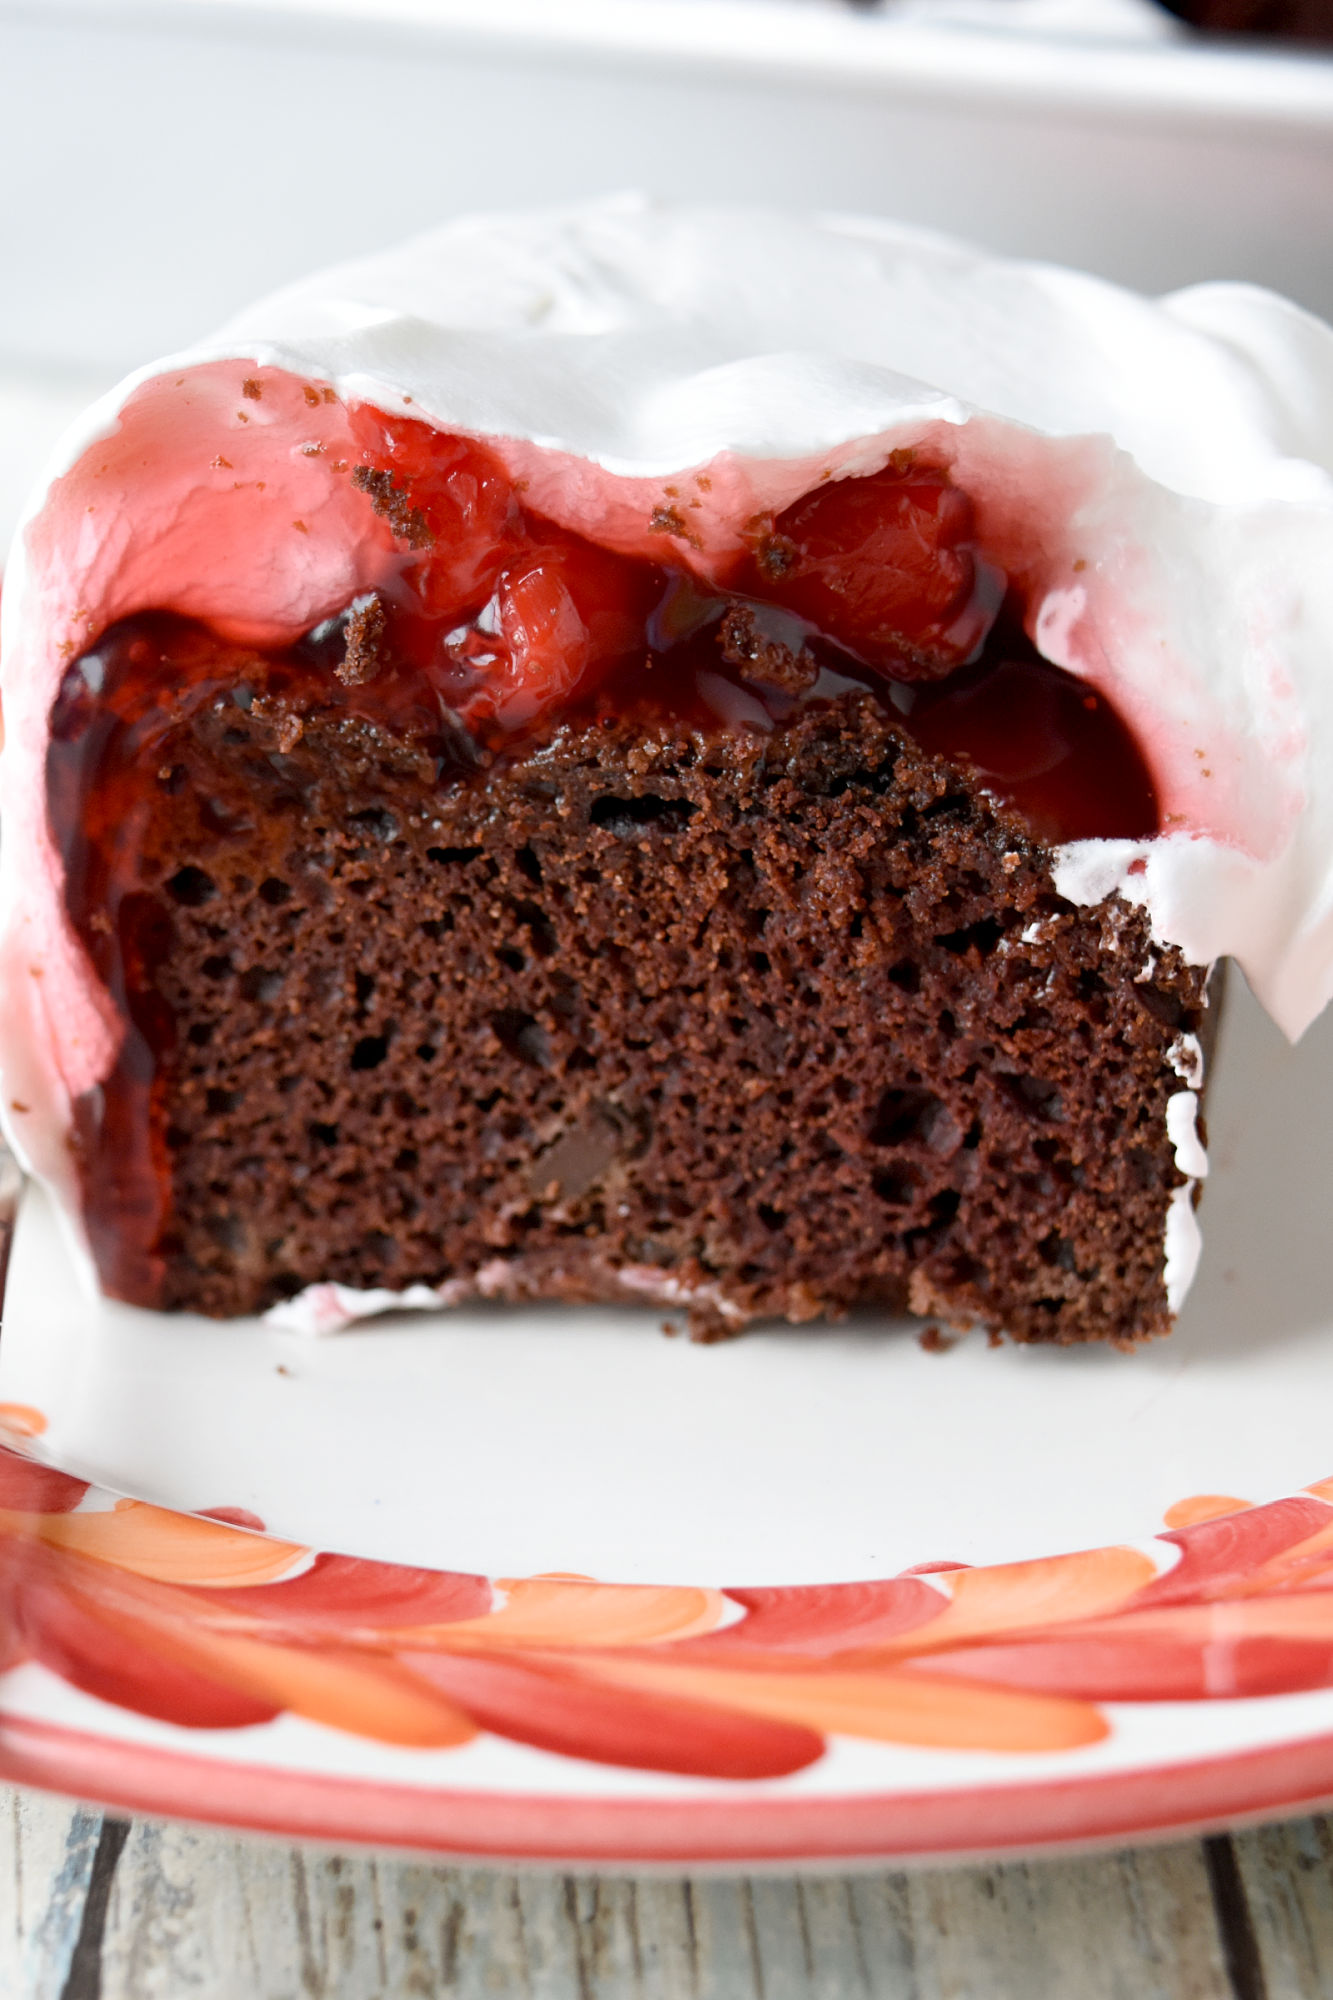 Black Forest Snack Cake has all the delicious chocolate and cherry flavors in an easy to make snack cake. The chocolate snack cake has cherry flavors inside the cake and has a cherry topping.  #ad #SpringSweetsWeek #Easter #BlackForestCake #easycake #cherrytopping